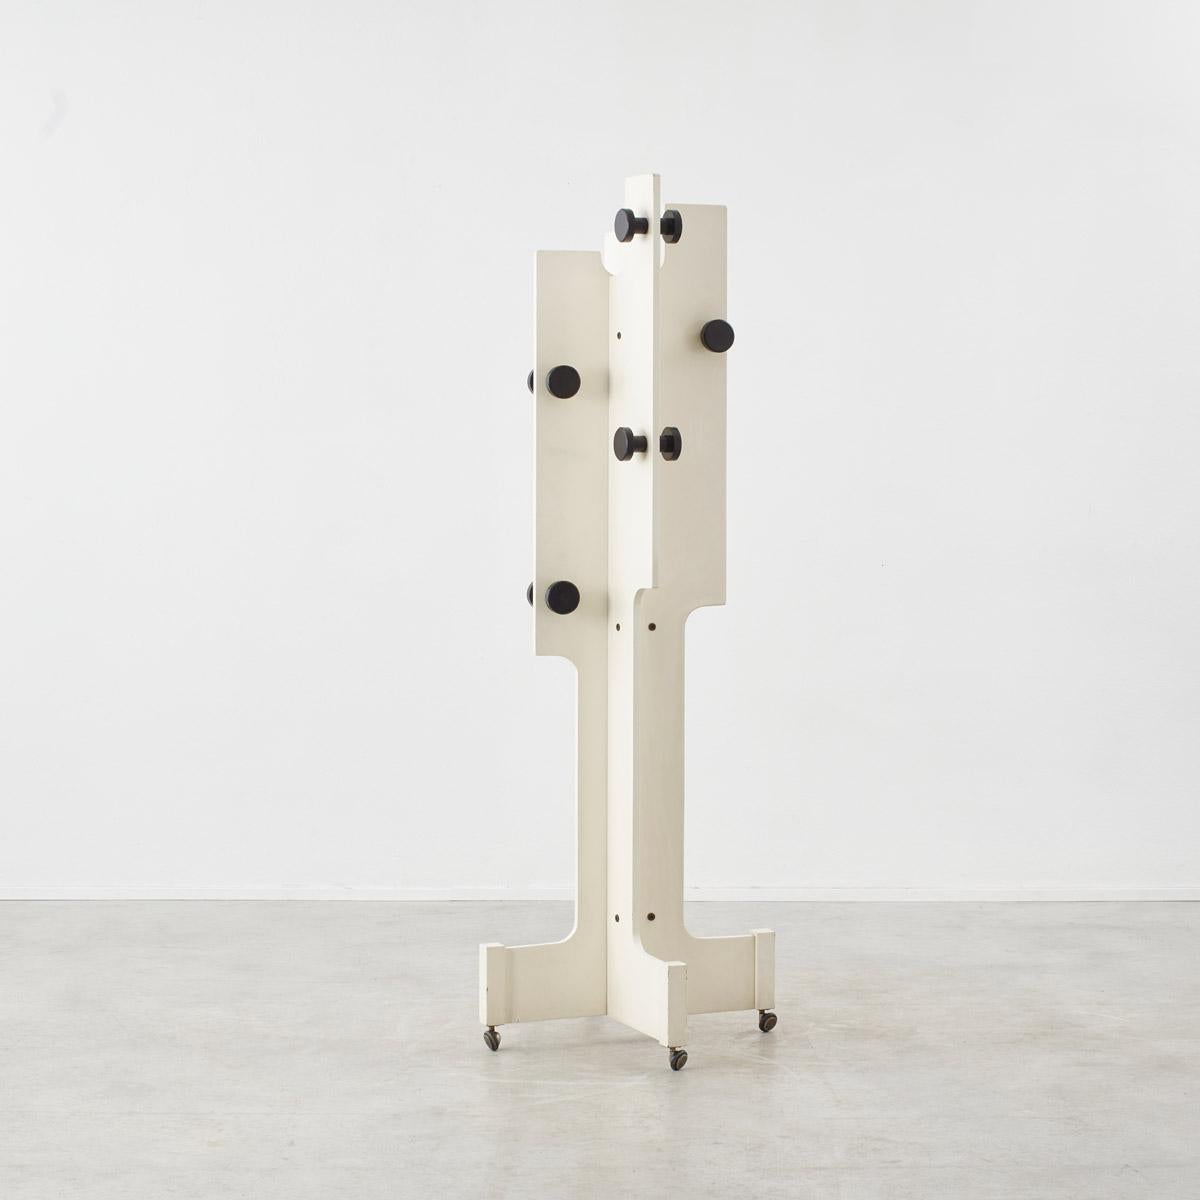 Playfully reflecting the silhouettes of the Memphis movement, this white lacquered wooden coat stand is formed of sharp lines and strong curves complimented by bold black knobs dotted across the structure. The stand is on four wheels, allowing for